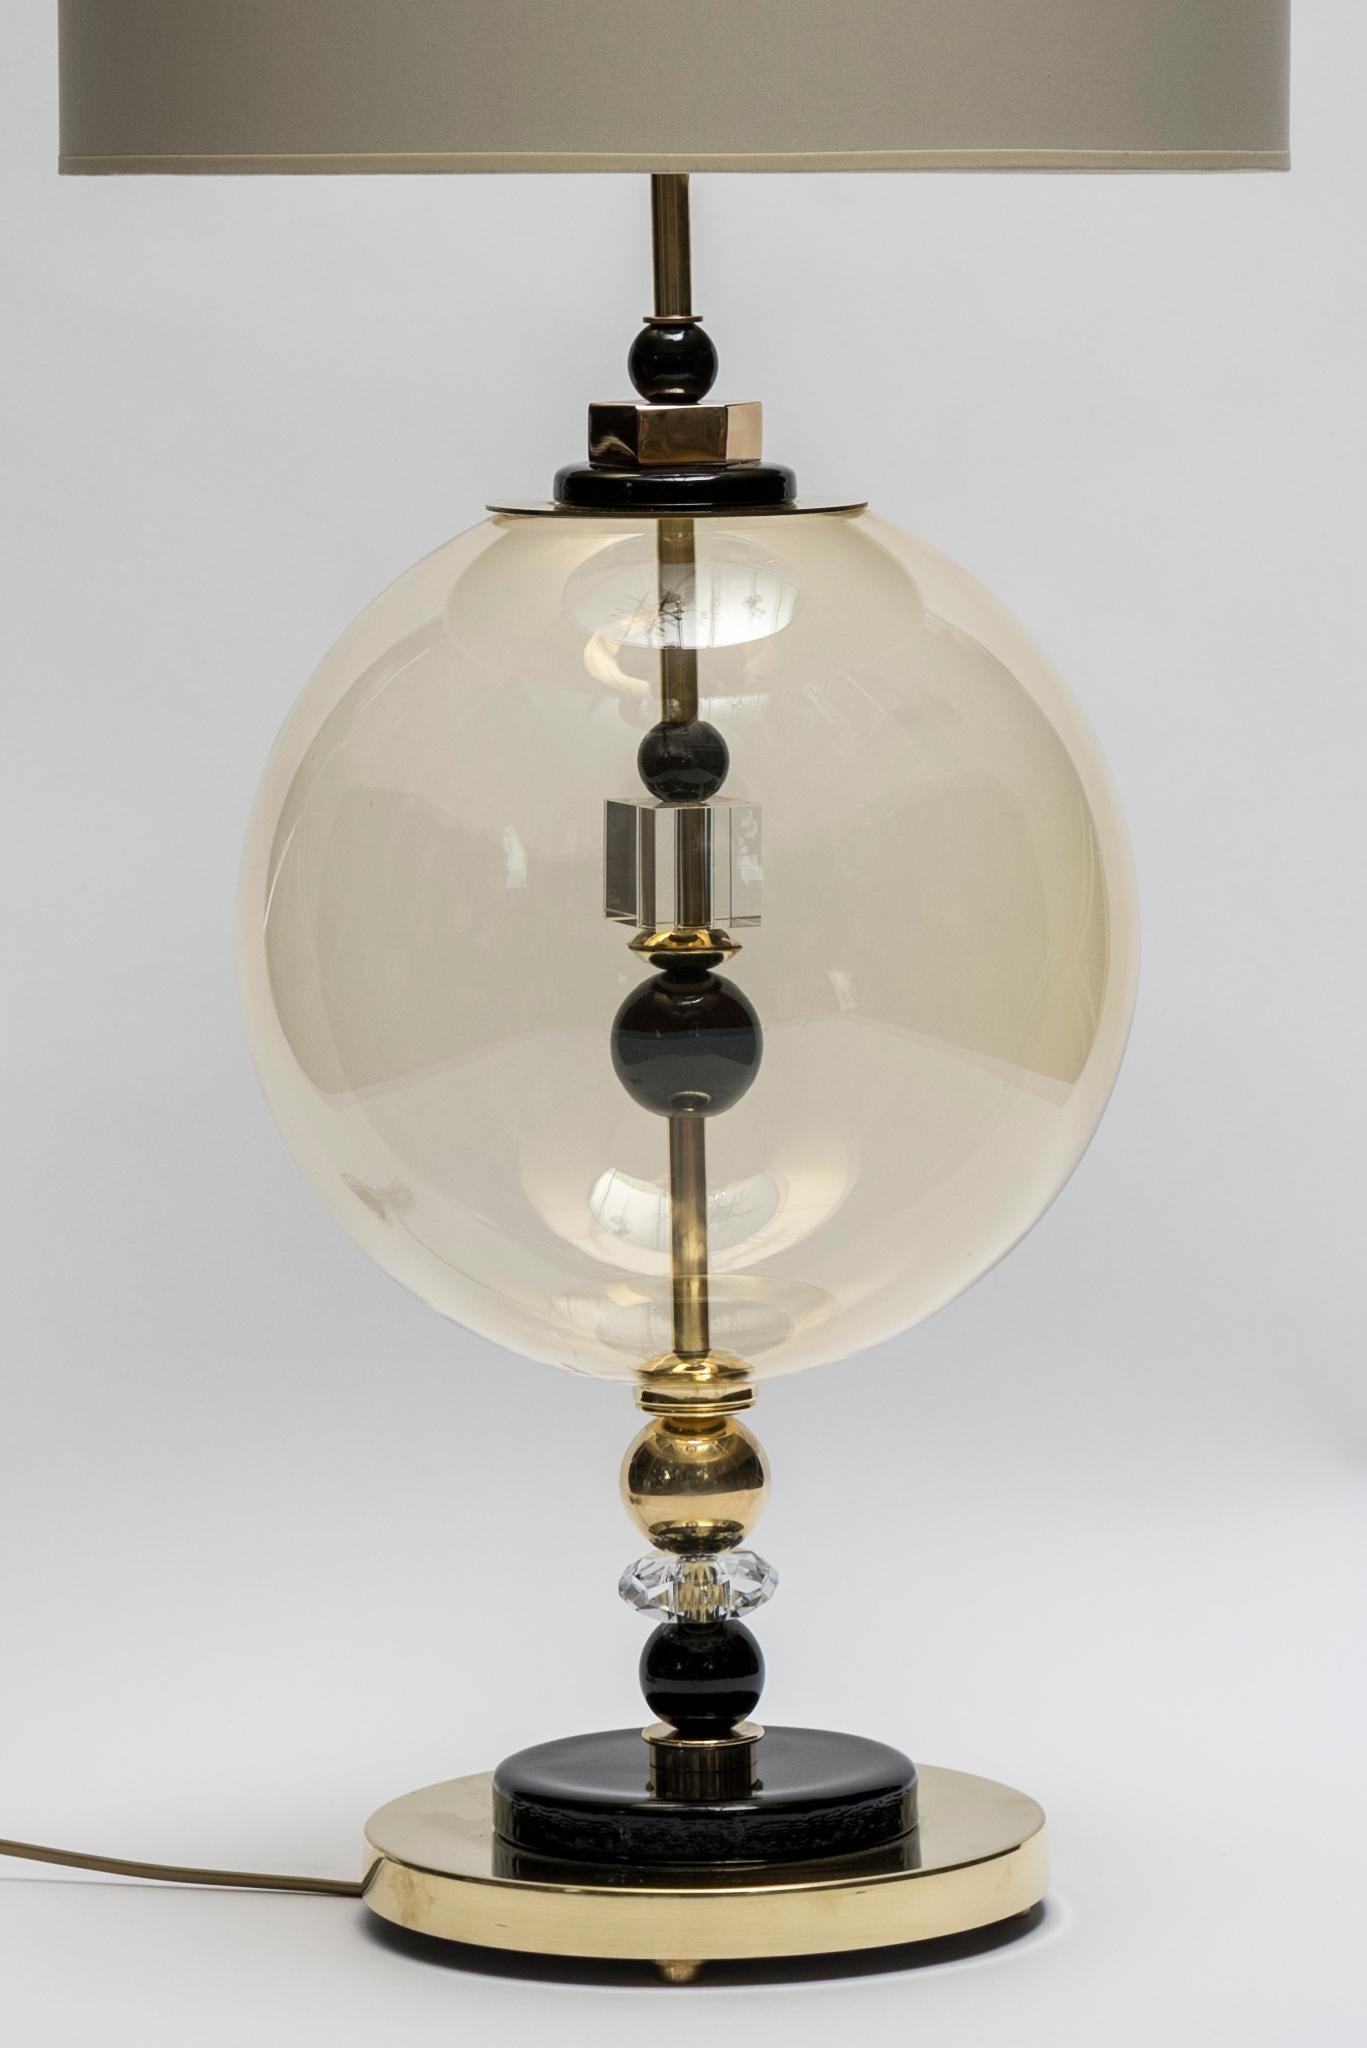 Pair of table lamps made of brass with black Murano glass pieces and a large globe as a centrepiece.